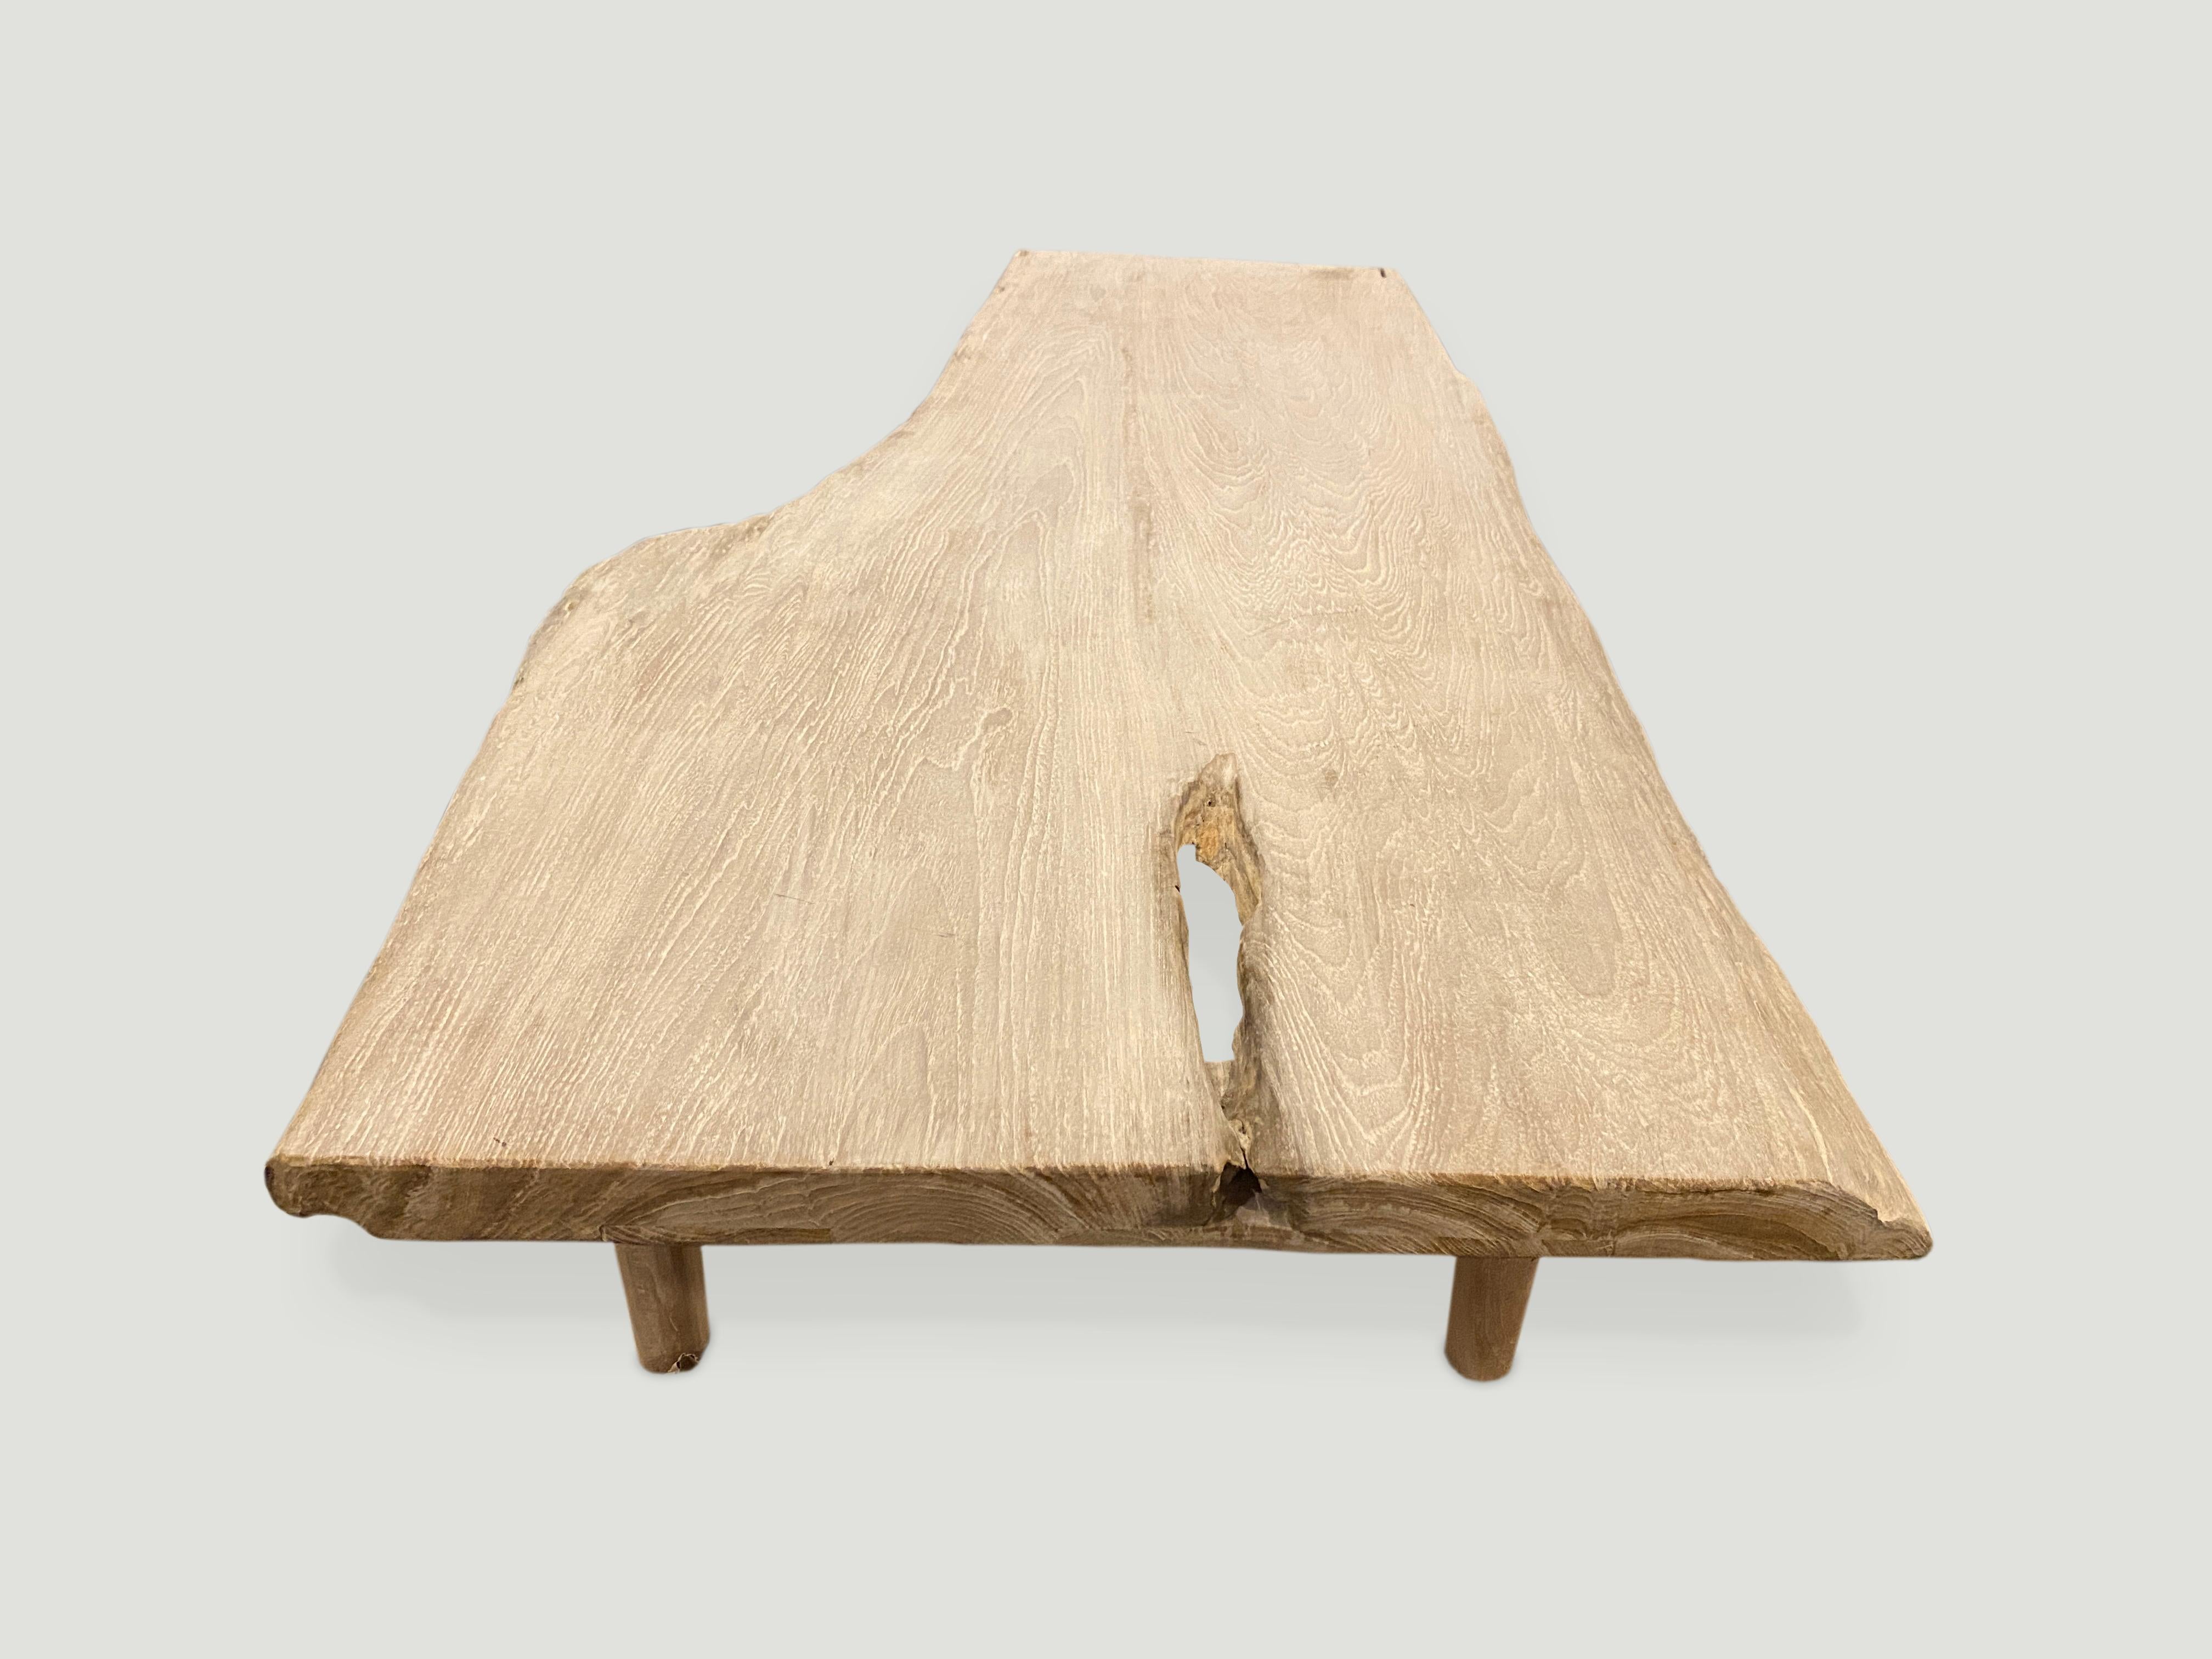 Andrianna Shamaris Live Edge Teak Wood Coffee Table or Bench In Excellent Condition For Sale In New York, NY